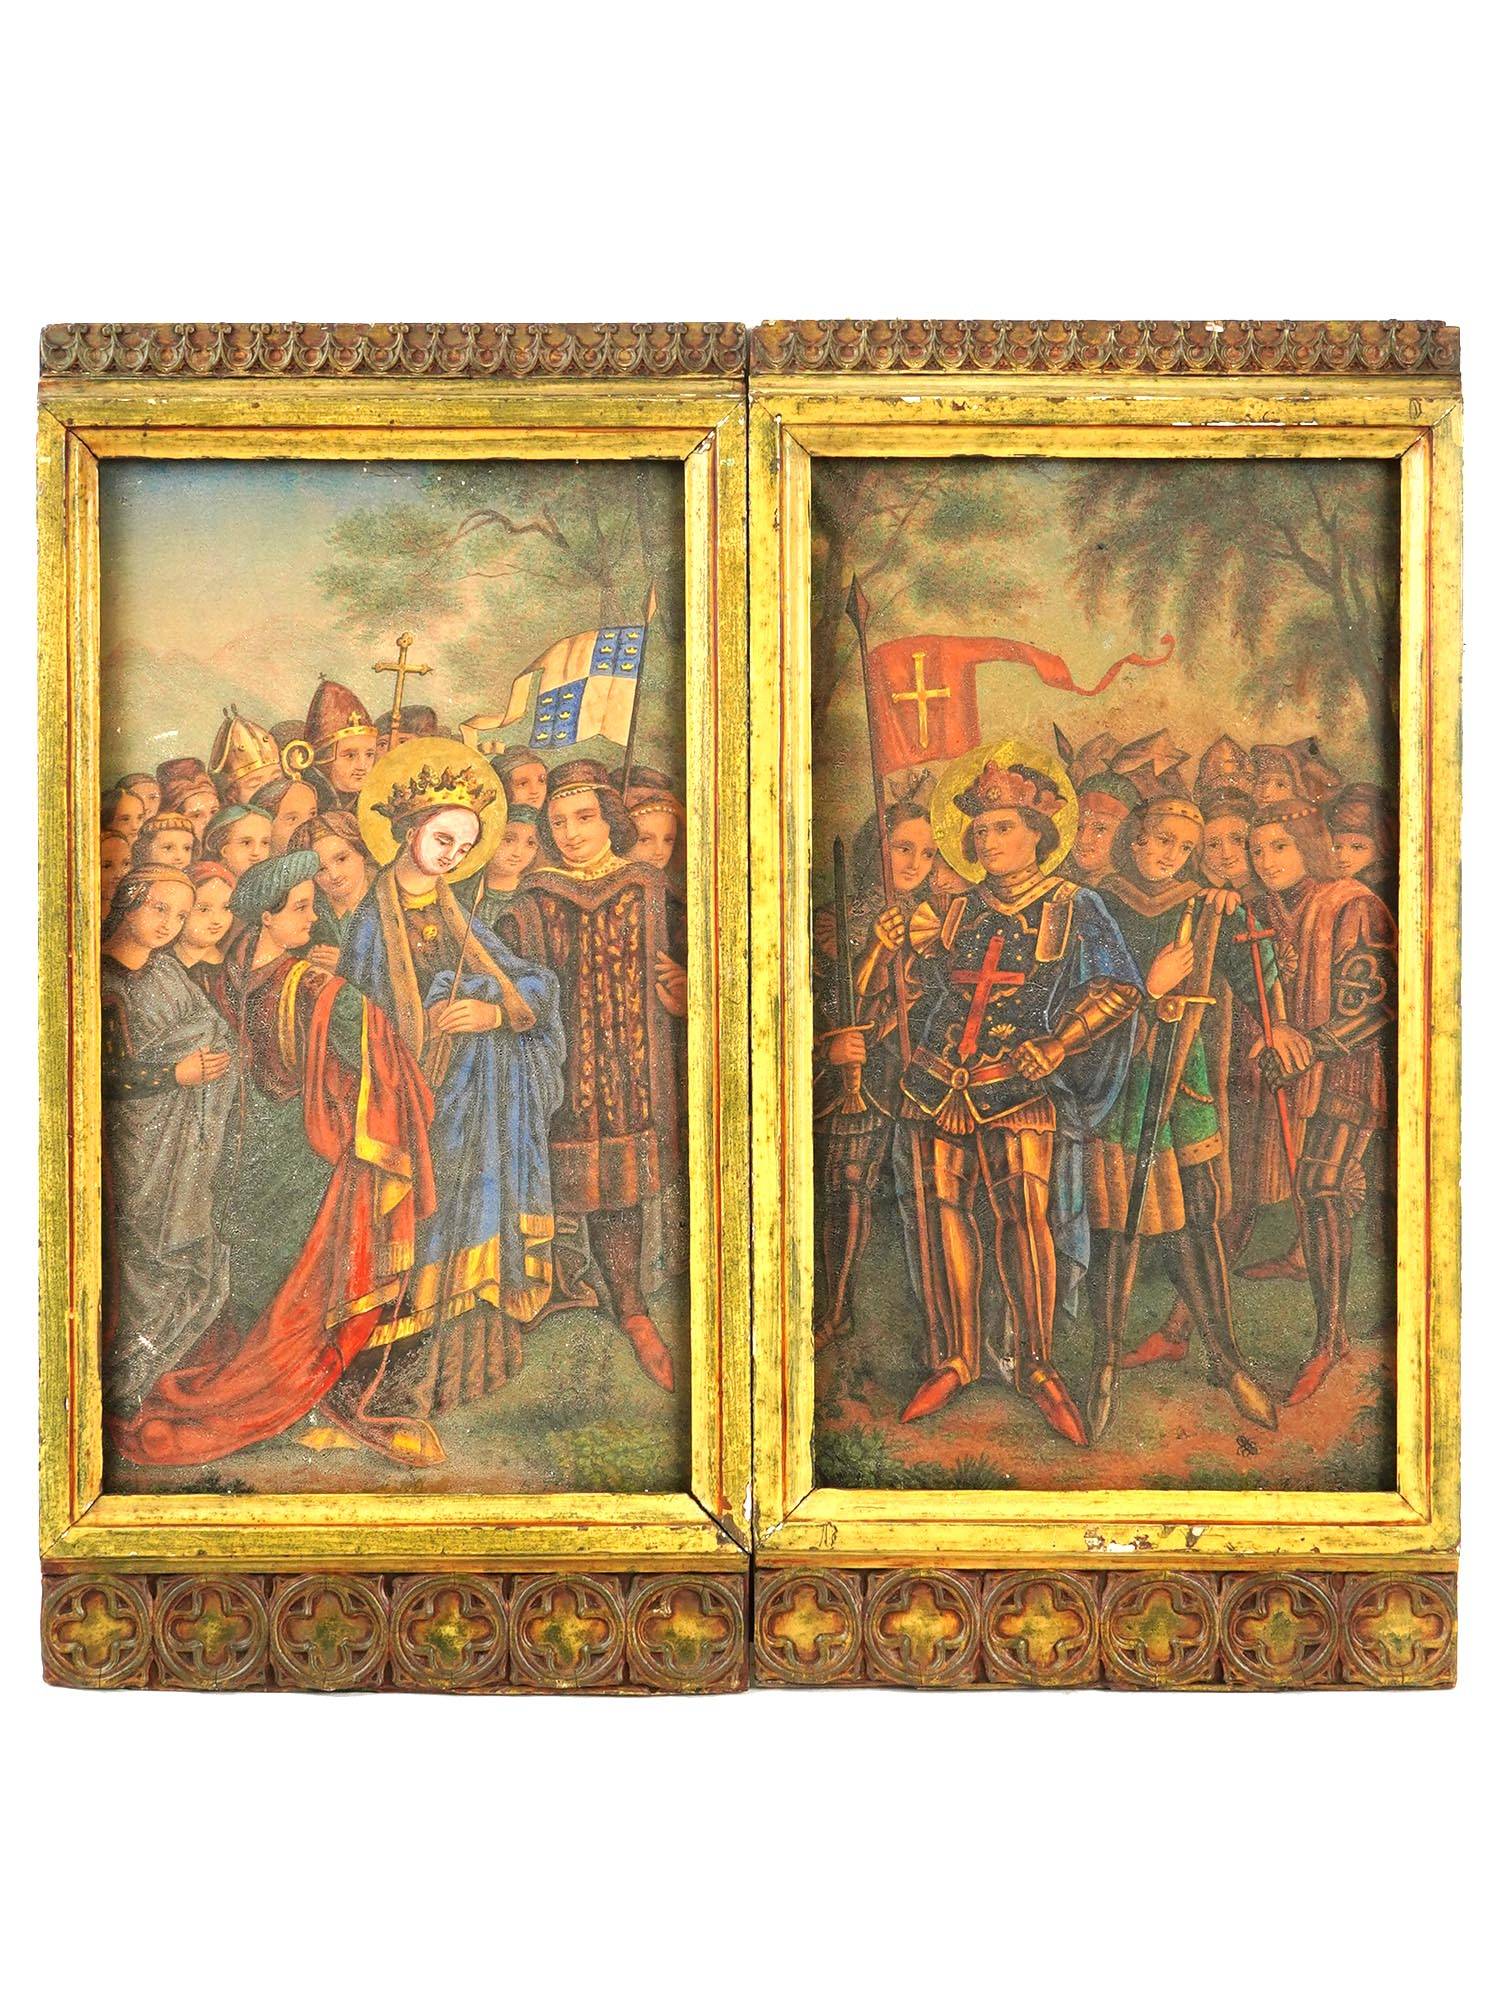 ANTIQUE DIPTYCH AFTER COLOGNE CATHEDRAL ALTARPIECE PIC-0